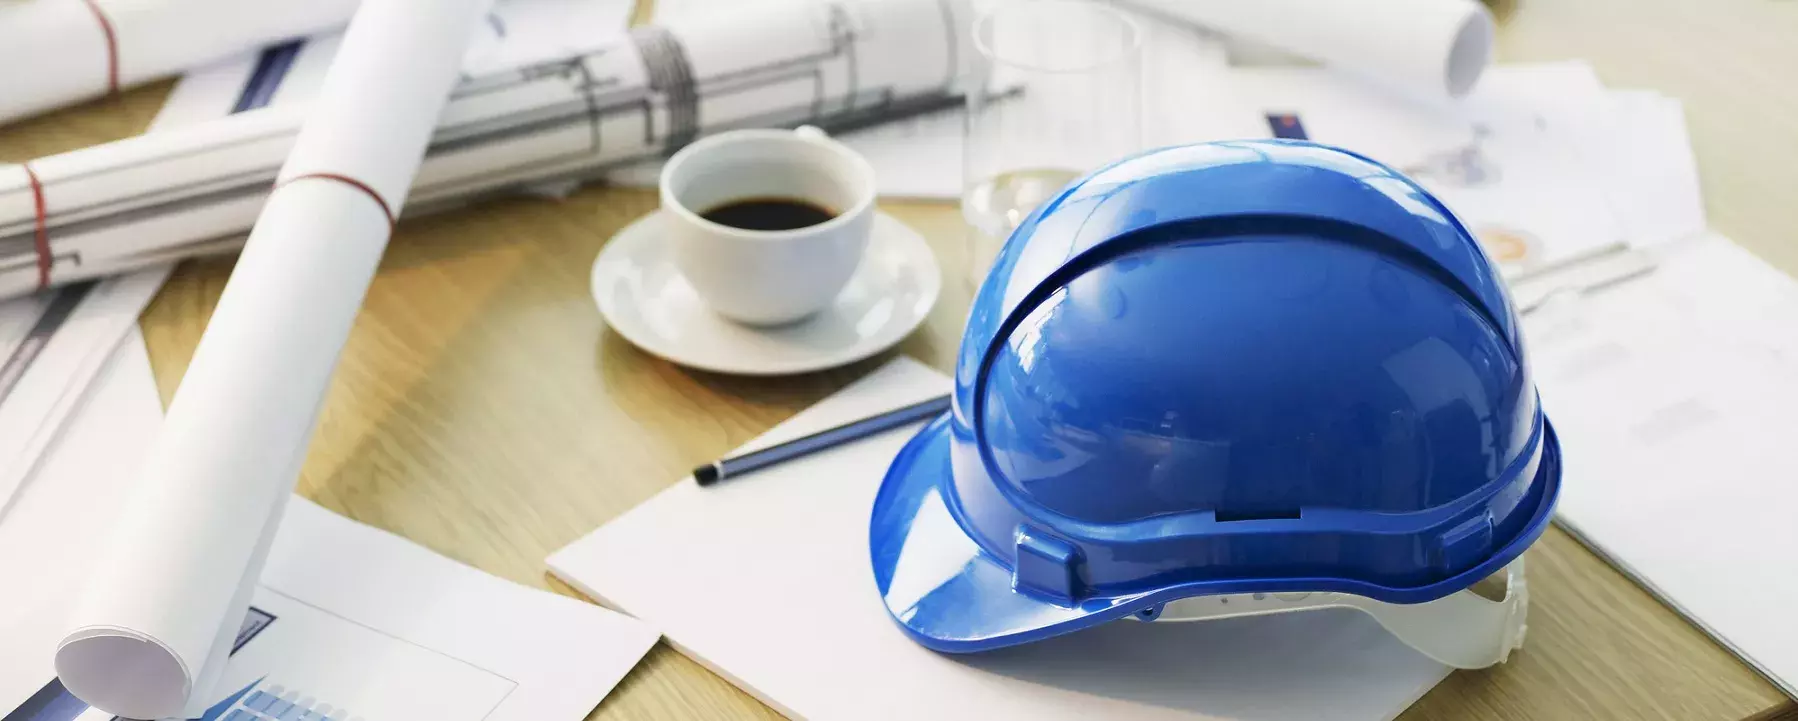 Plans and hard hat on a table